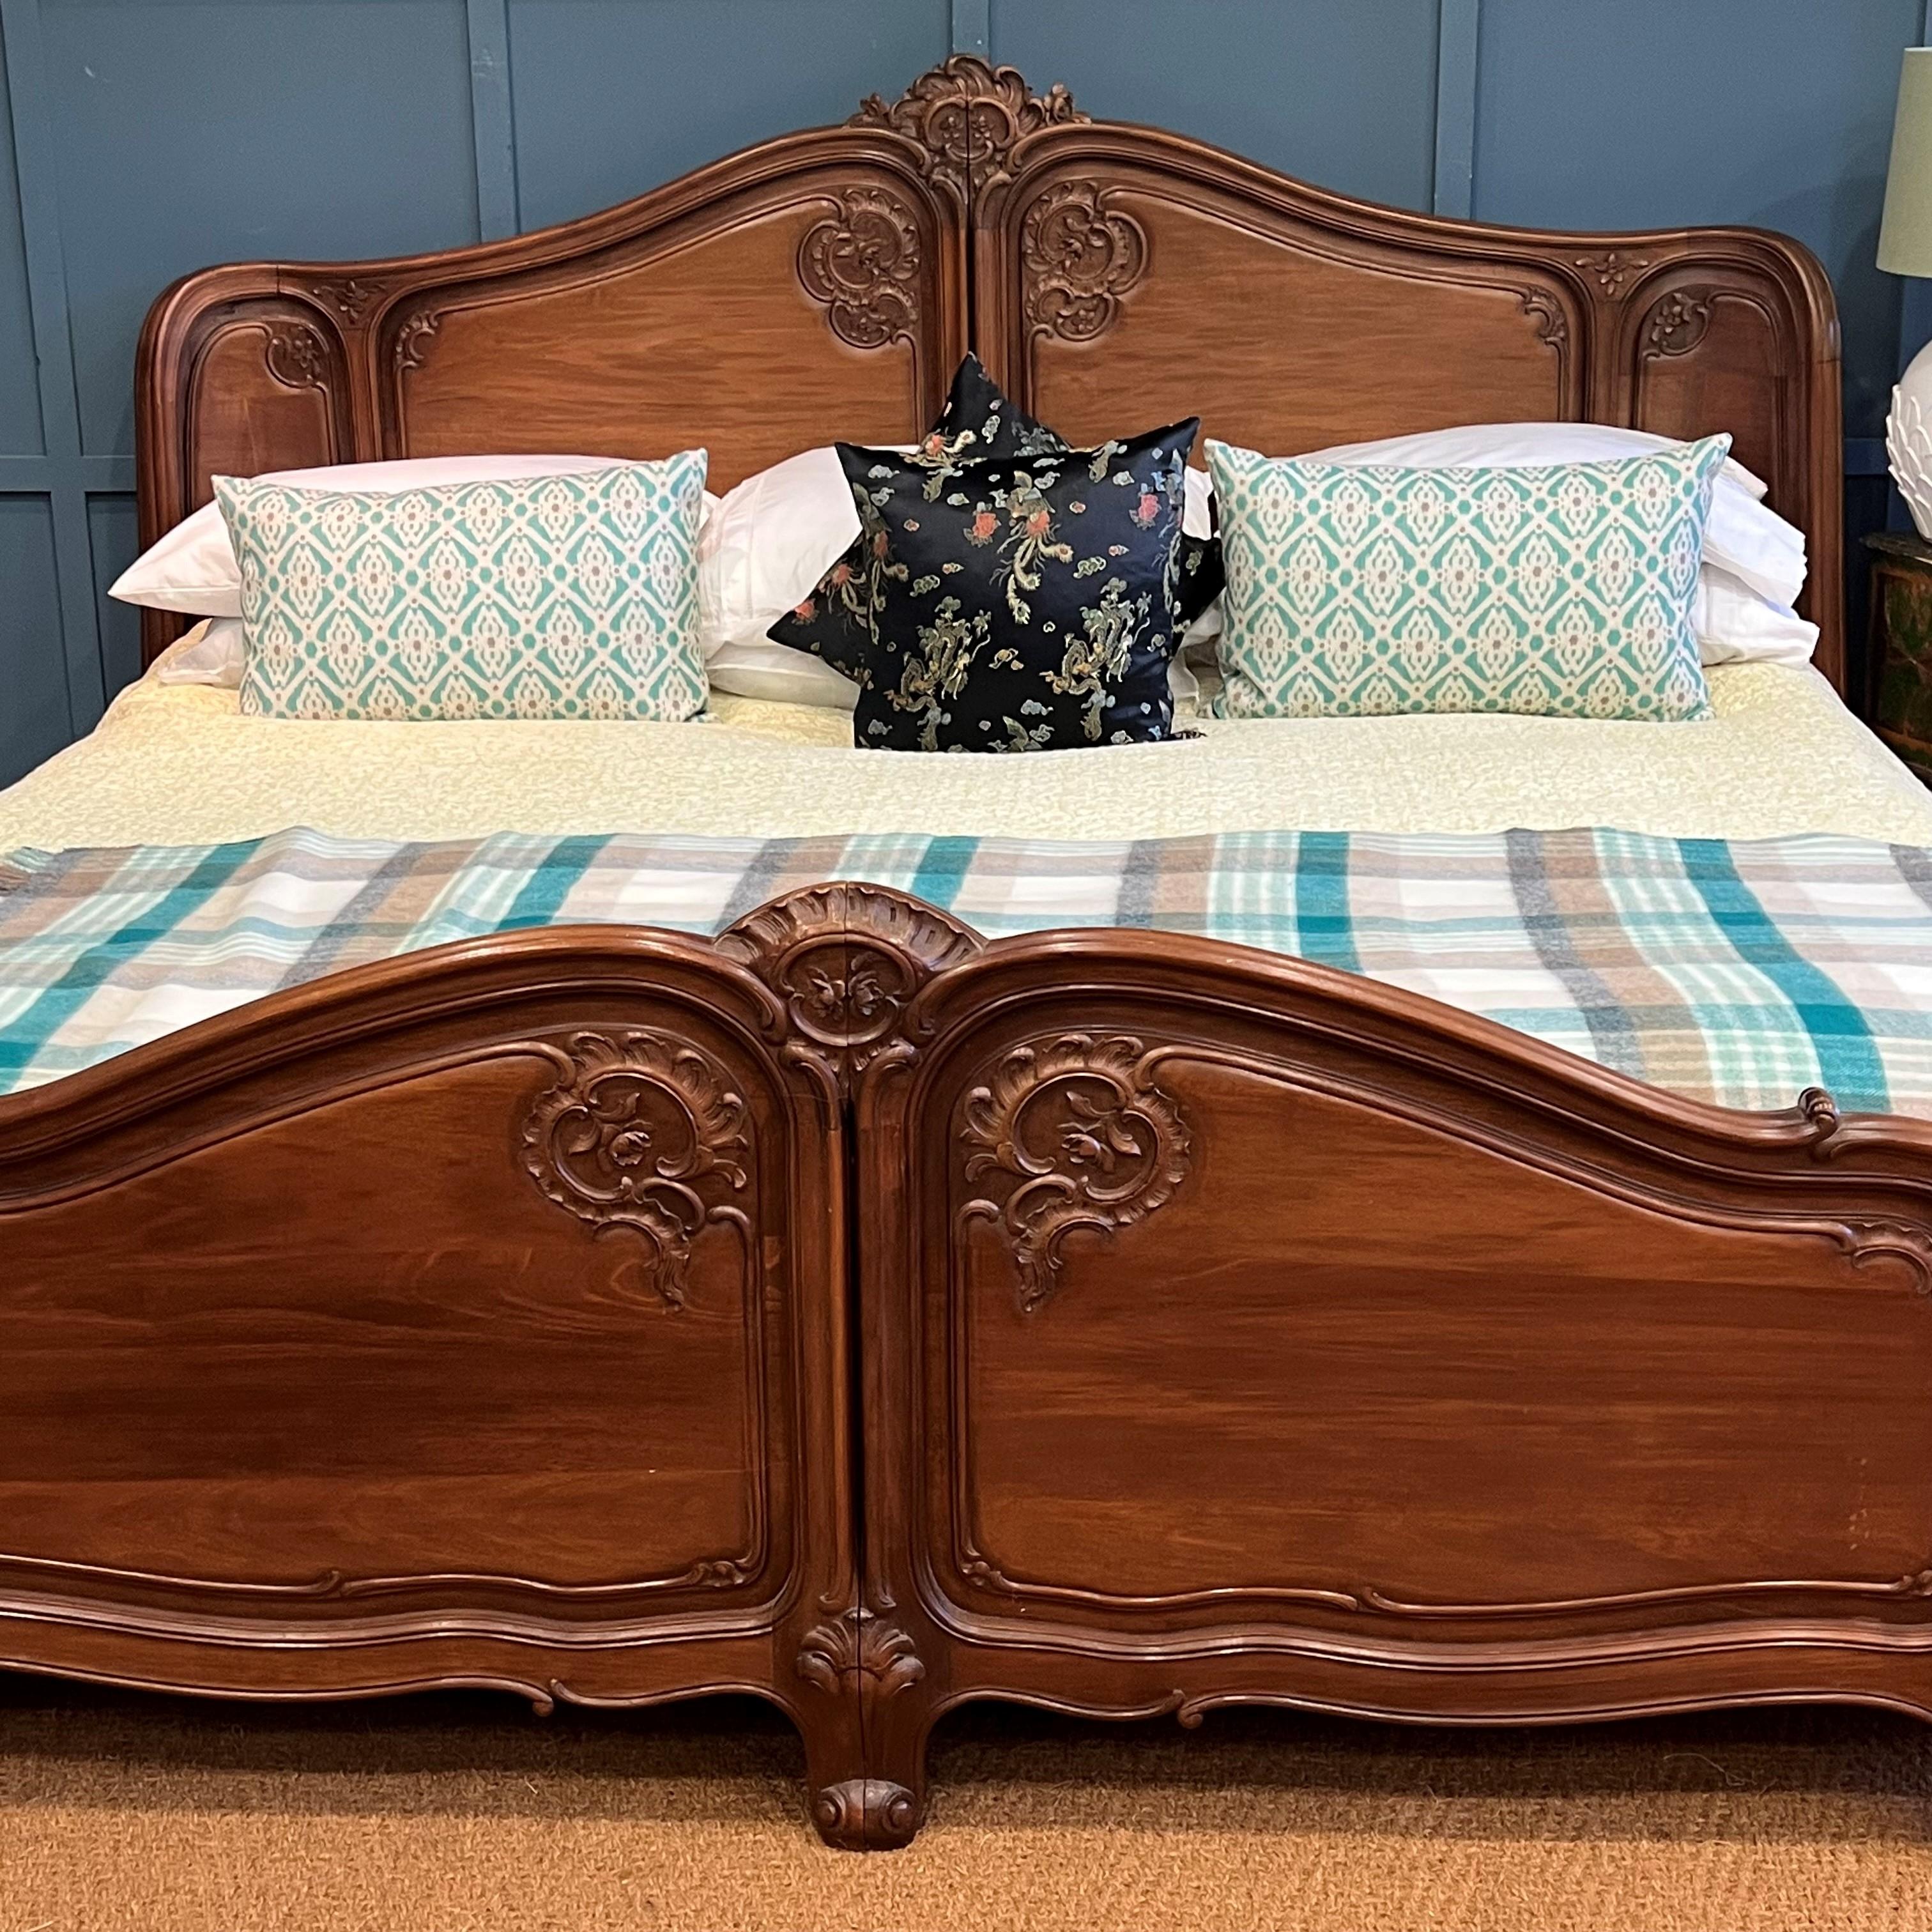 Large, elegant and extremely rare antique French walnut wooden bedstead circa 1900. The frame has a full corbeille, having both a curved head and foot end. The frame is in the Louis XV style. Excellent quality carvings and pretty shaped fielded